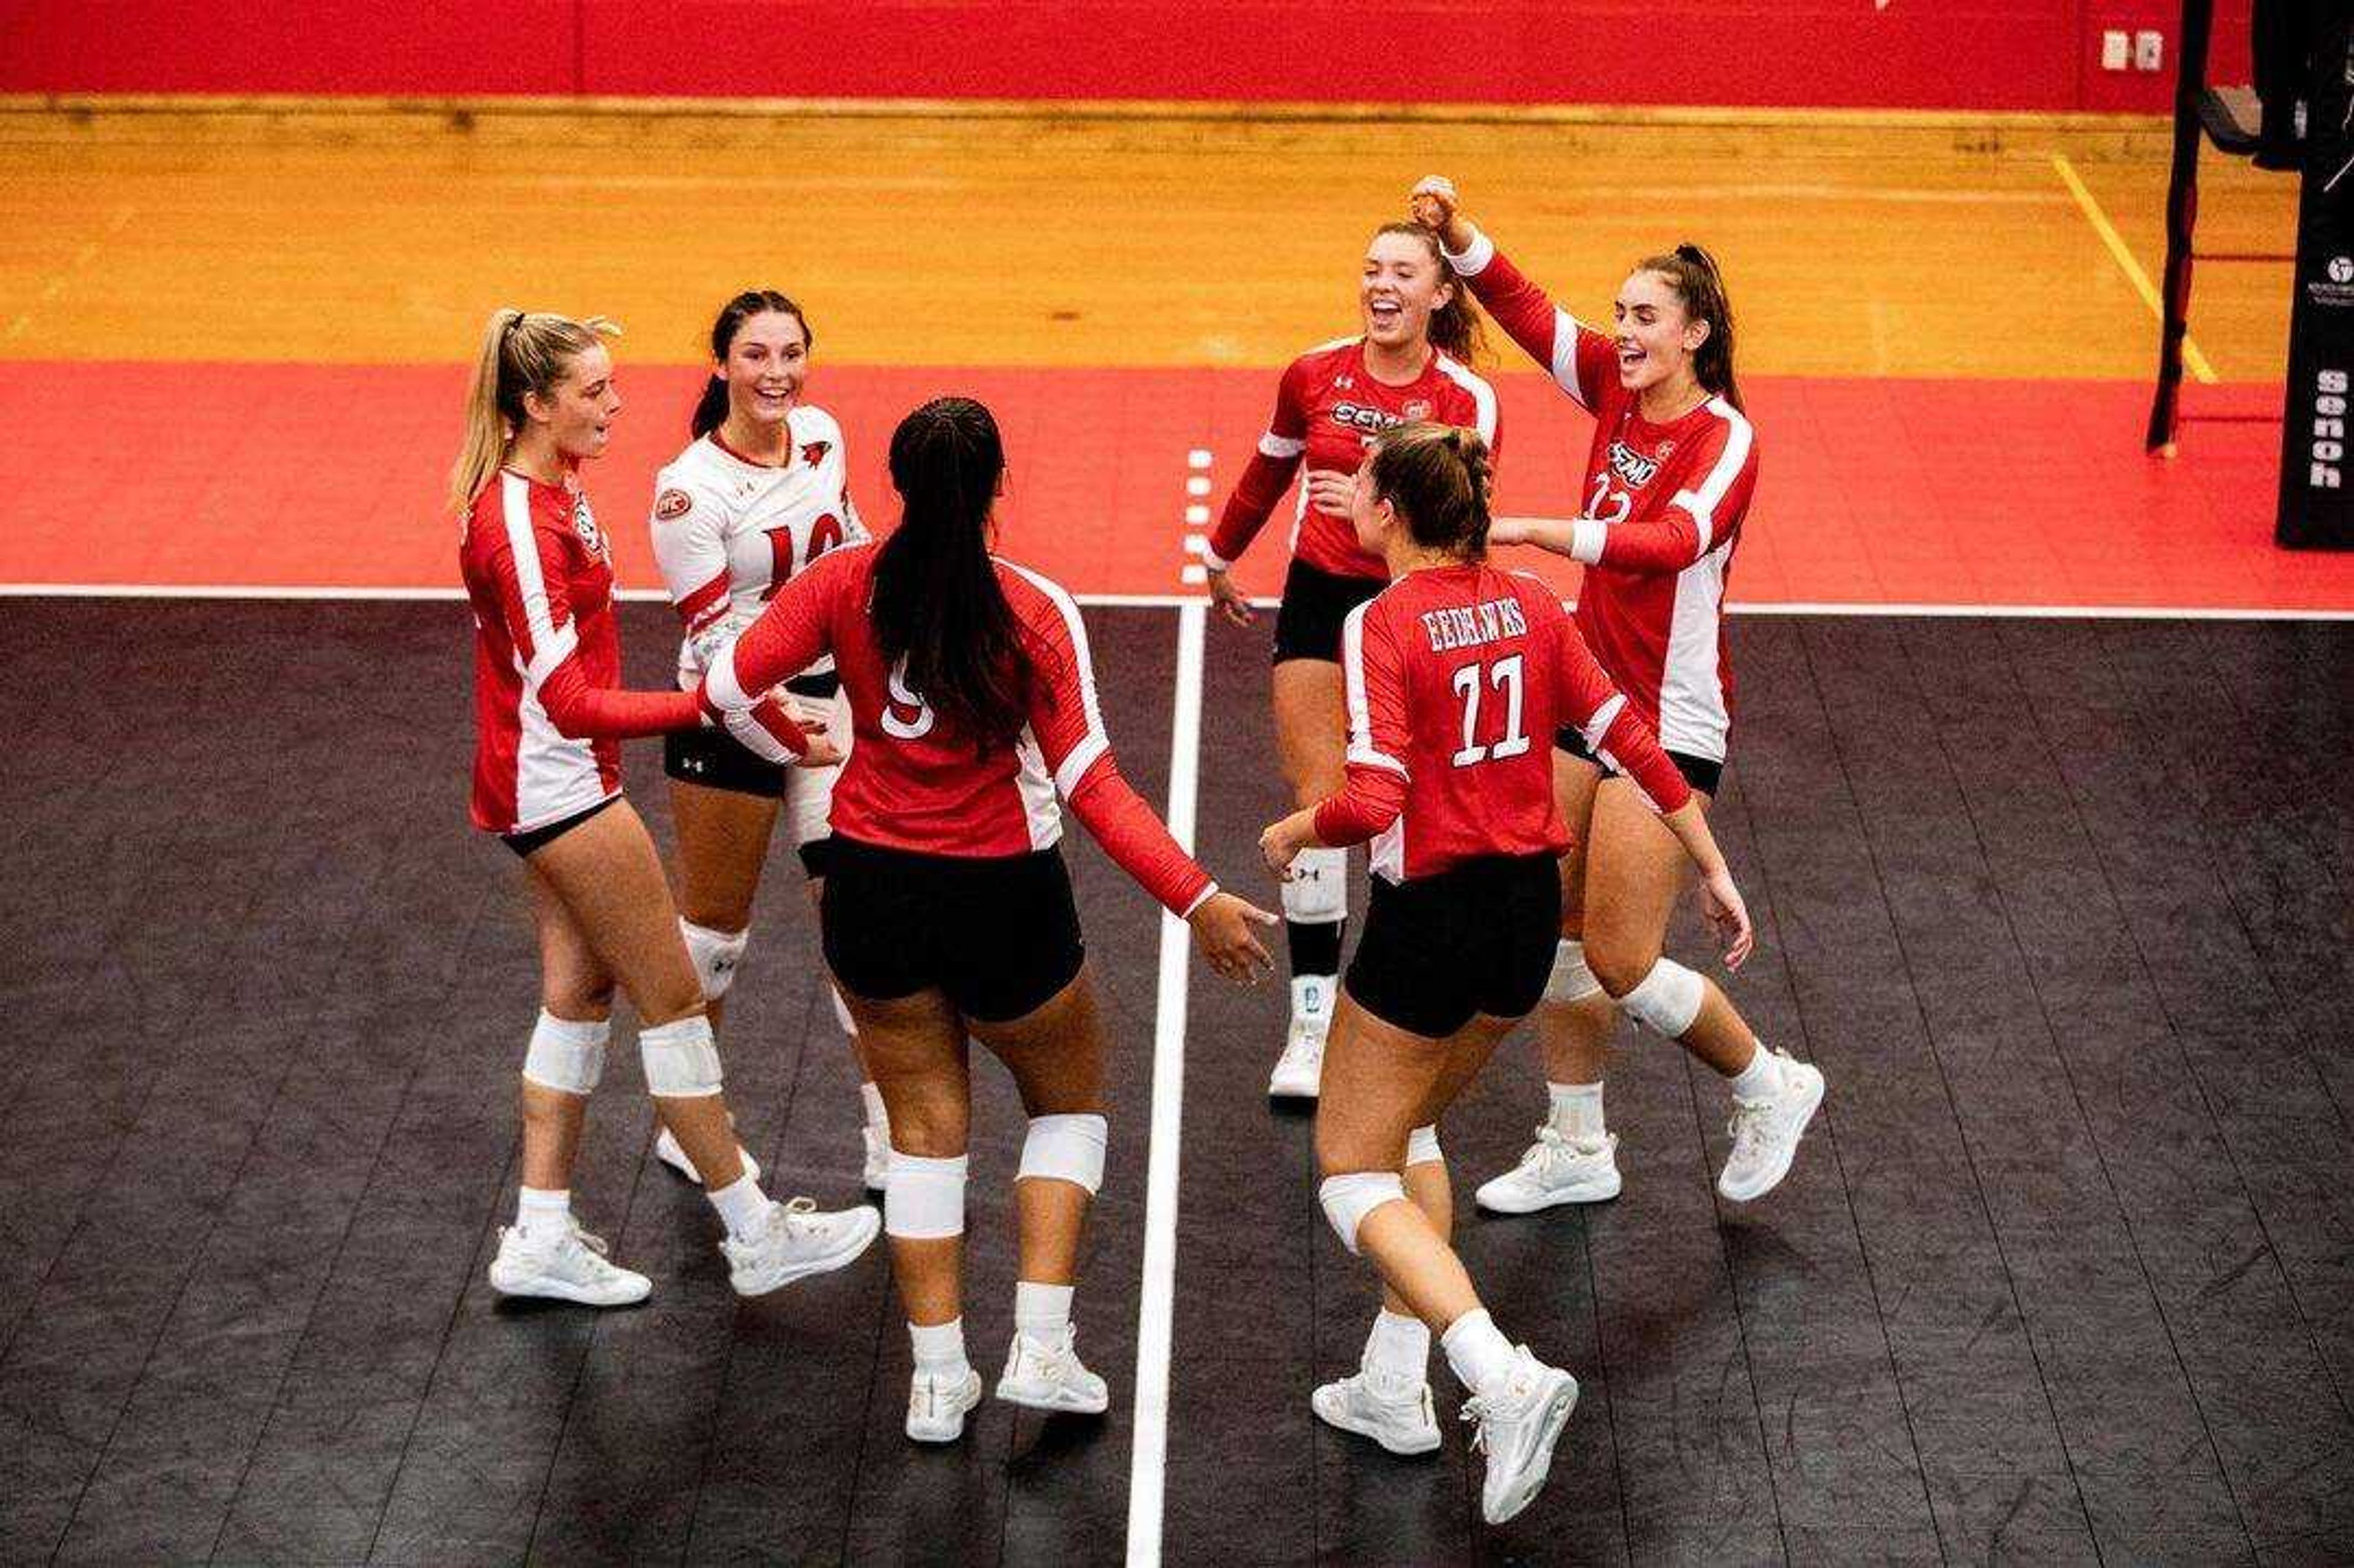 The Redhawk volleyball team celebrates after scoring a point on Saturday, Sept. 24 at Houck Field House.